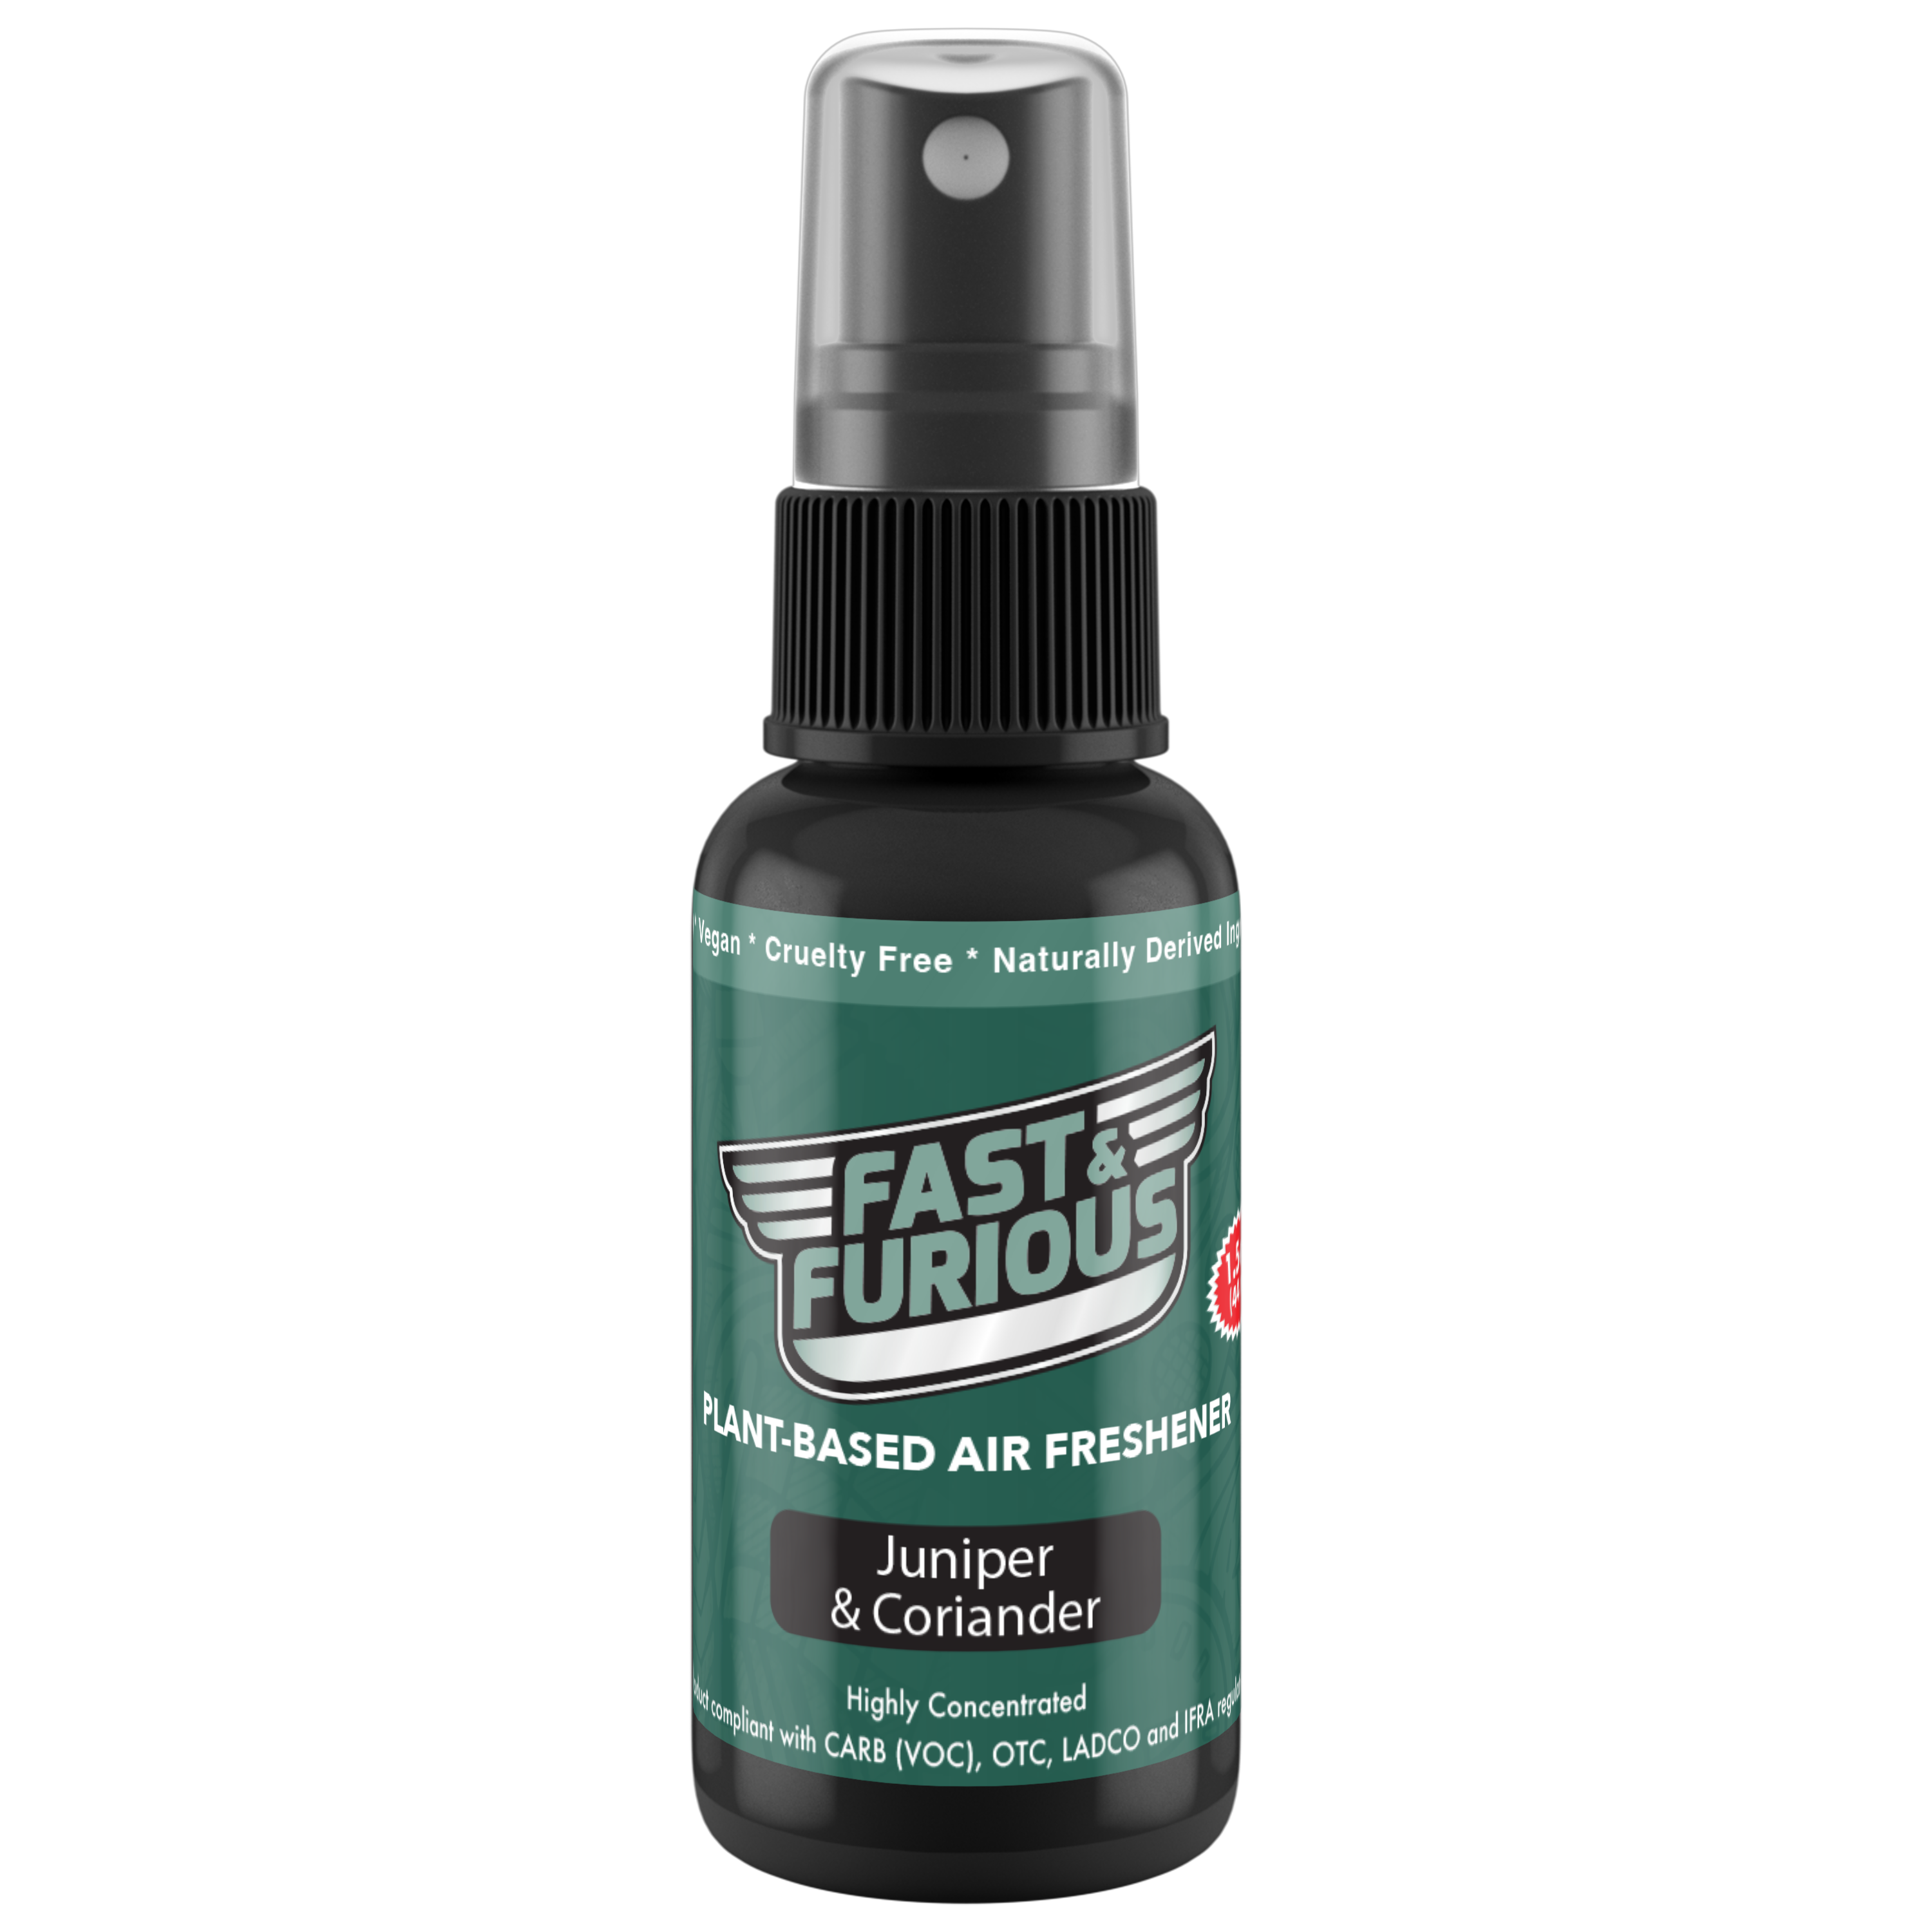 Fast and Furious Plant-Based Air Freshener - Juniper & Coriander Scent